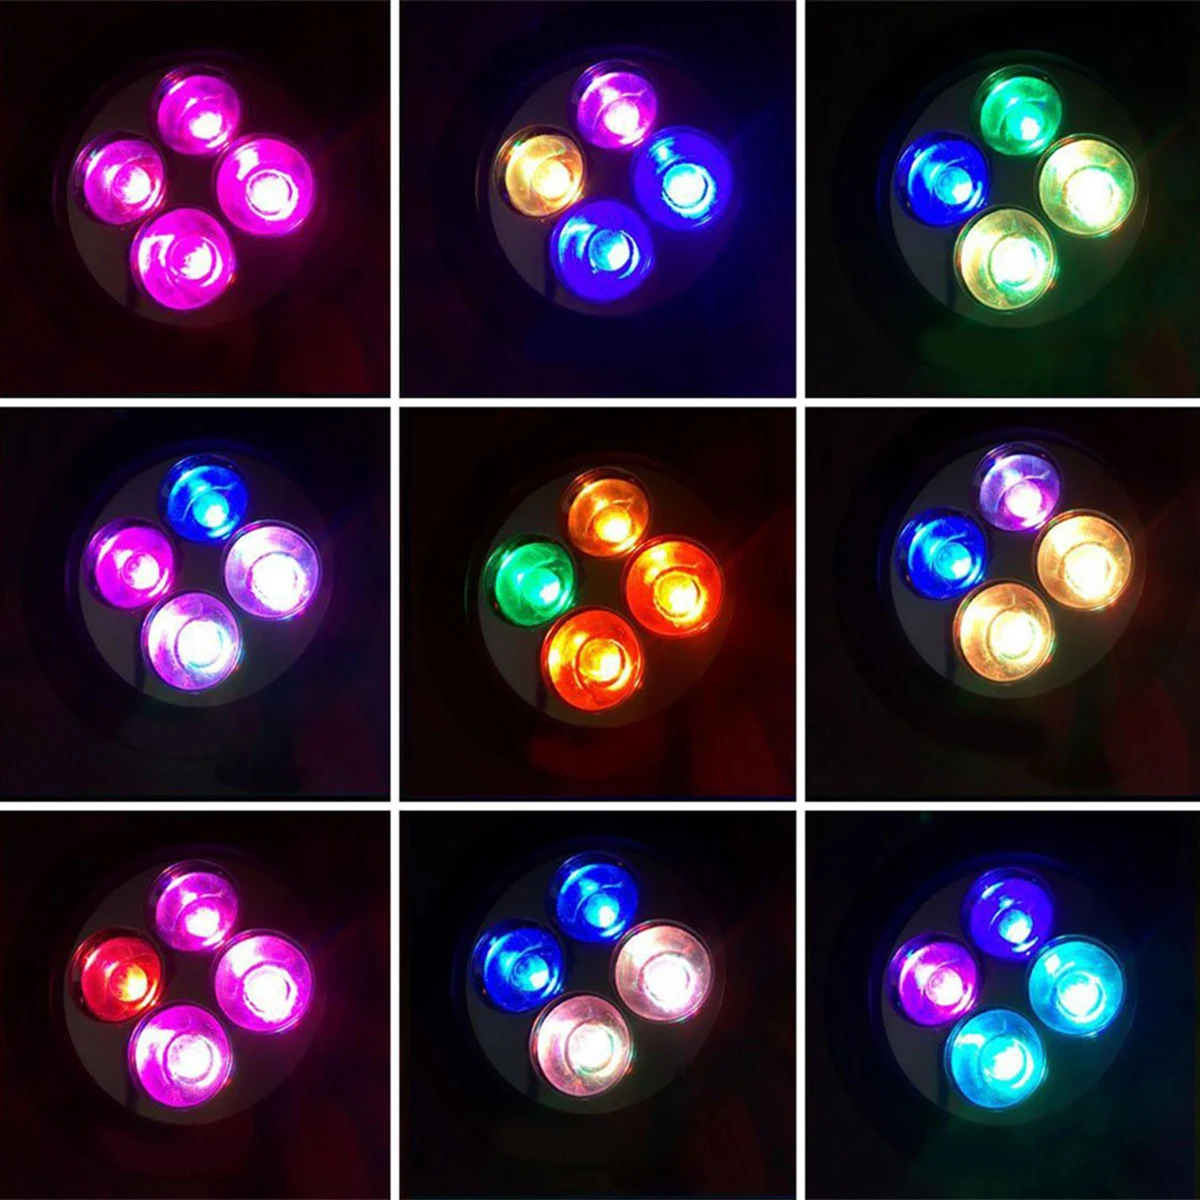 

4 LED Solar Powered Ground Garden RGB colorful bulbs Lawn Light Dark Sensing Patio Light with Spike Stand waterproof IP65